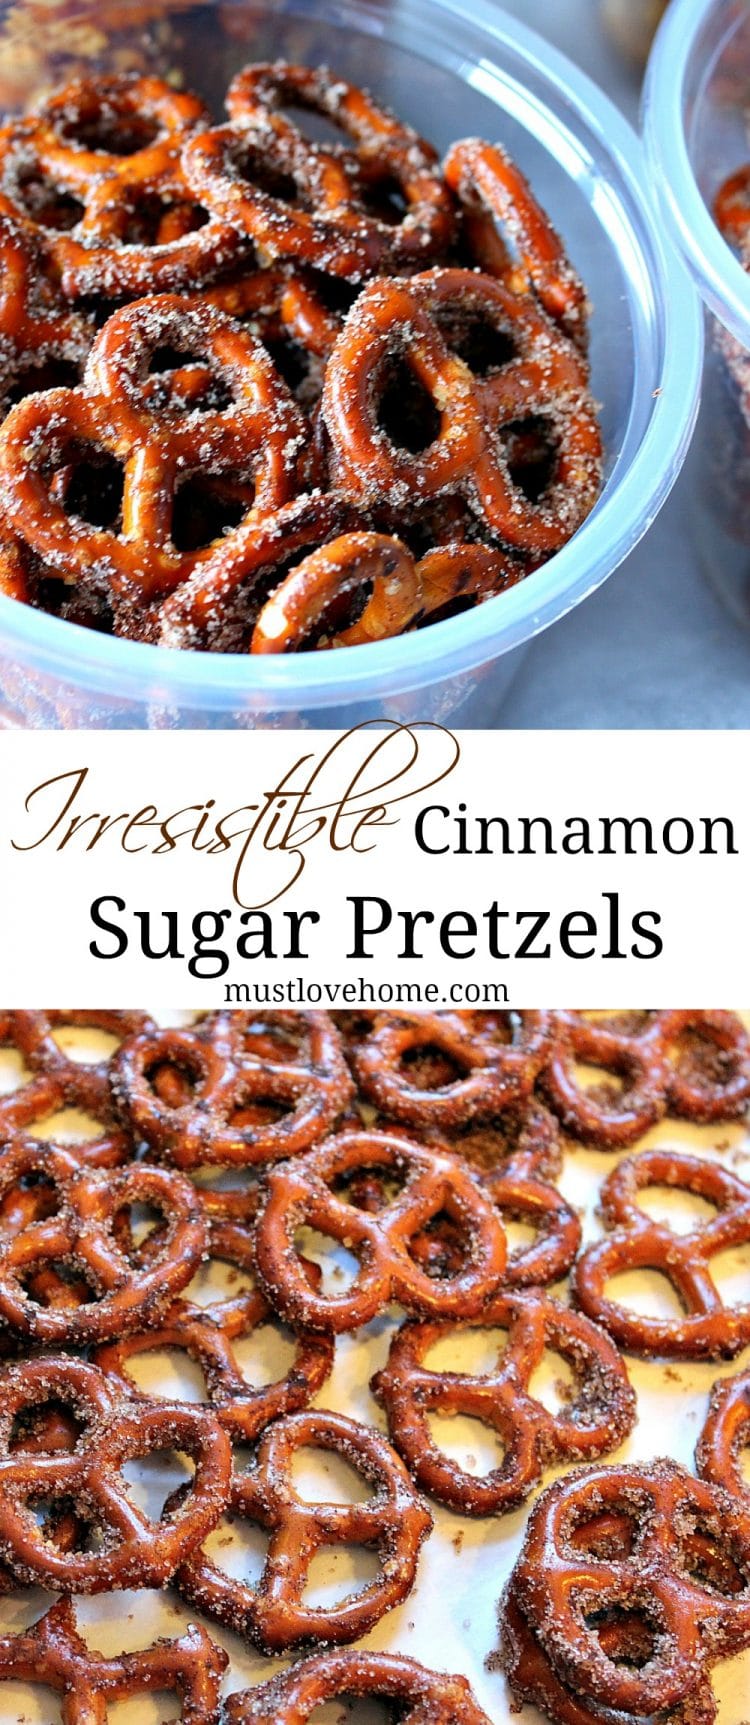 So Irresistible Cinnamon Sugar Pretzels use just four ingredients to take your average pretzel to a new snacking level. Set out a bowl of these and watch them disappear!